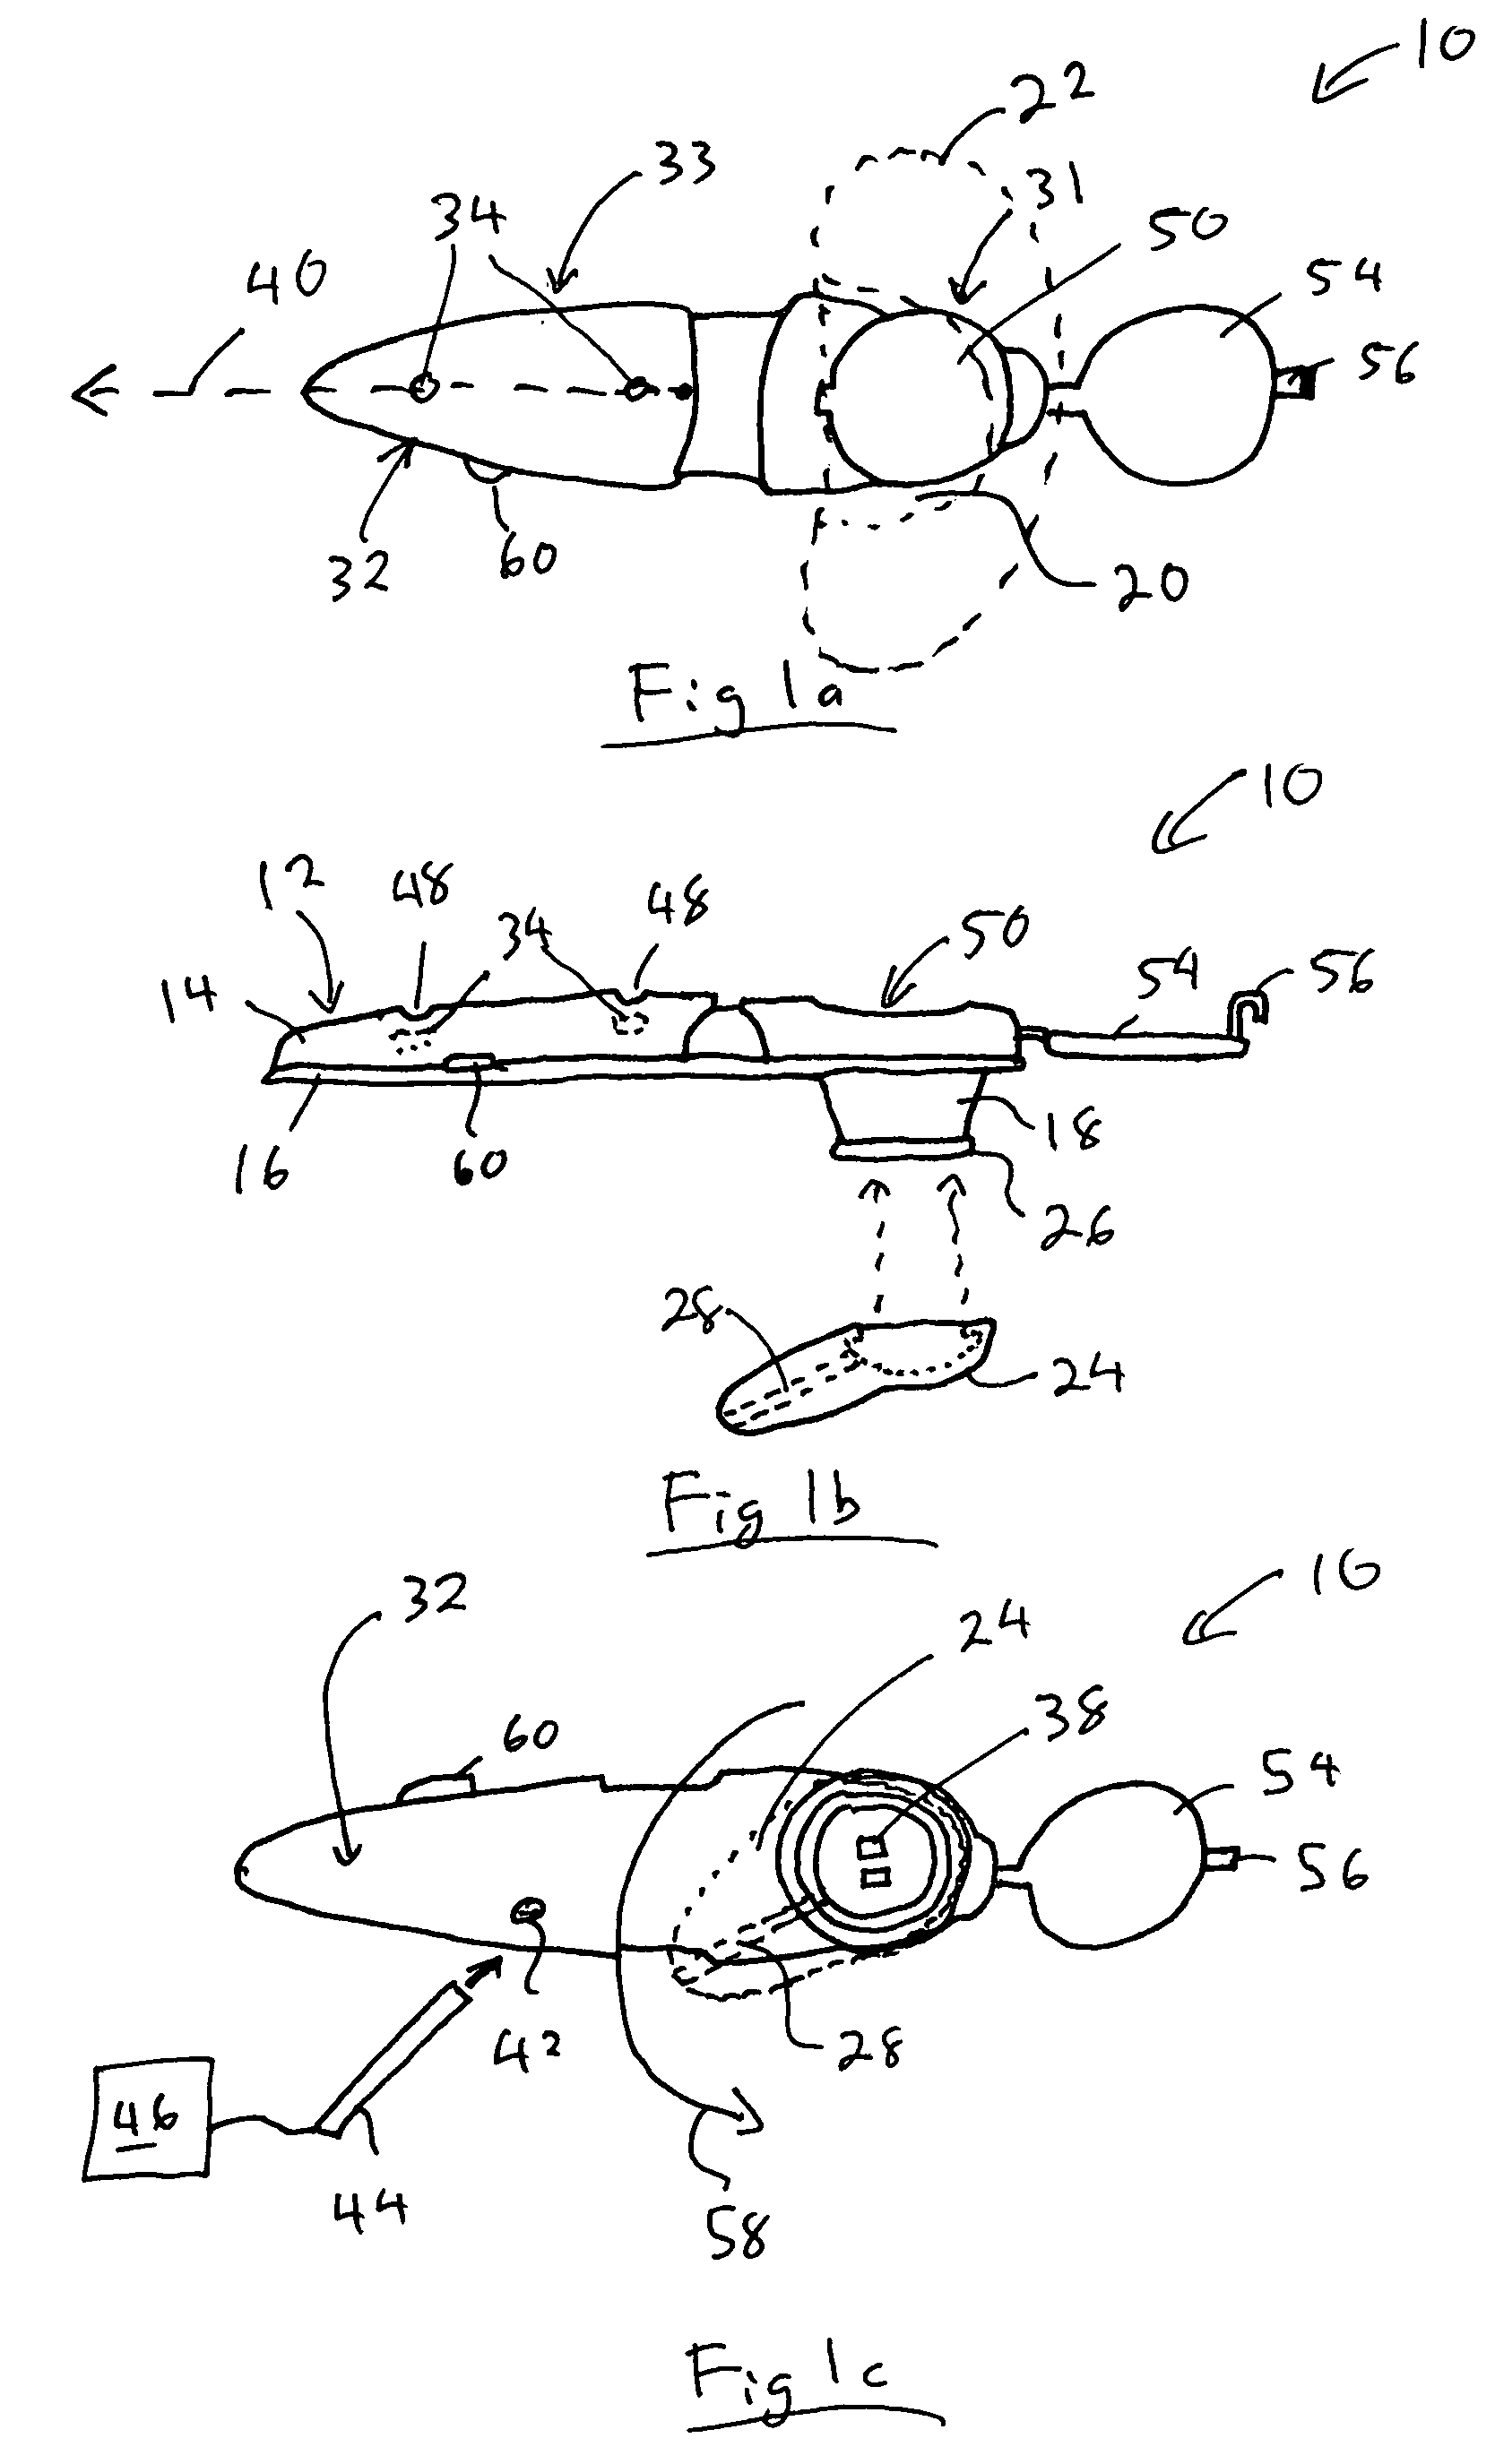 Method and apparatus for directional enhancement of speech elements in noisy environments